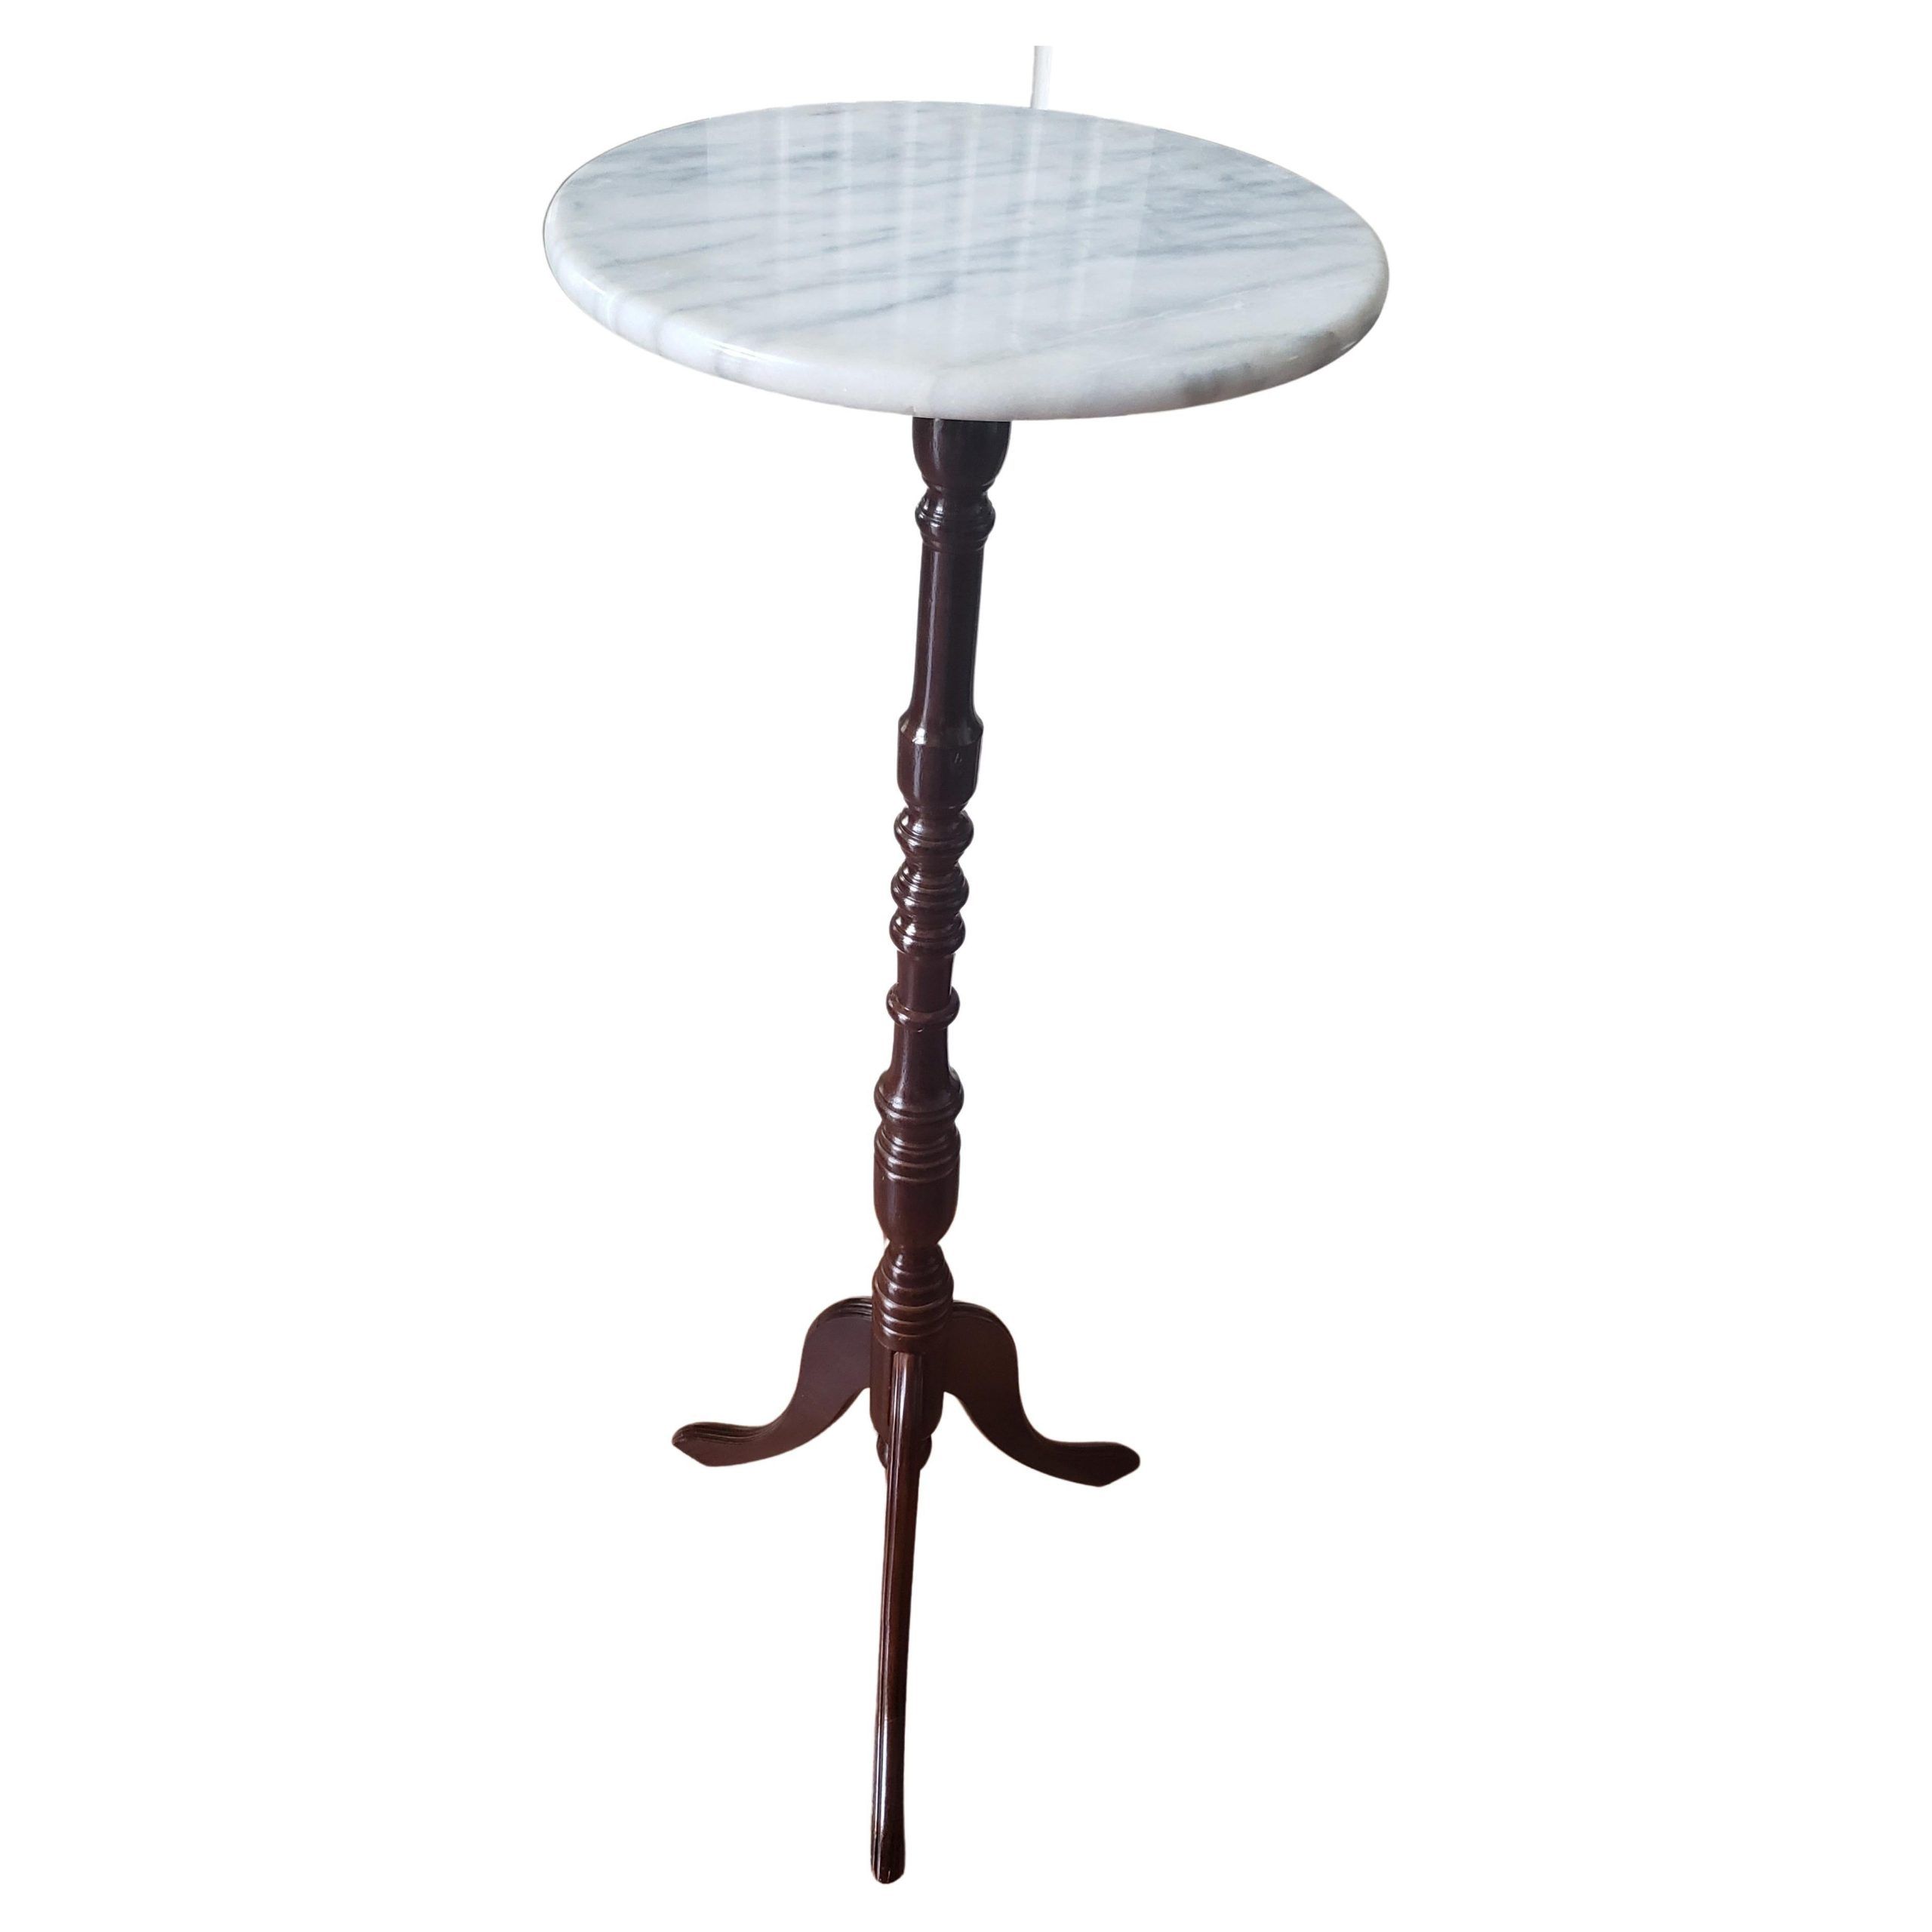 Marble Plant Stands Intended For Latest Pedestal Mahogany Plant Stand With Marble Top At 1stdibs (View 3 of 15)